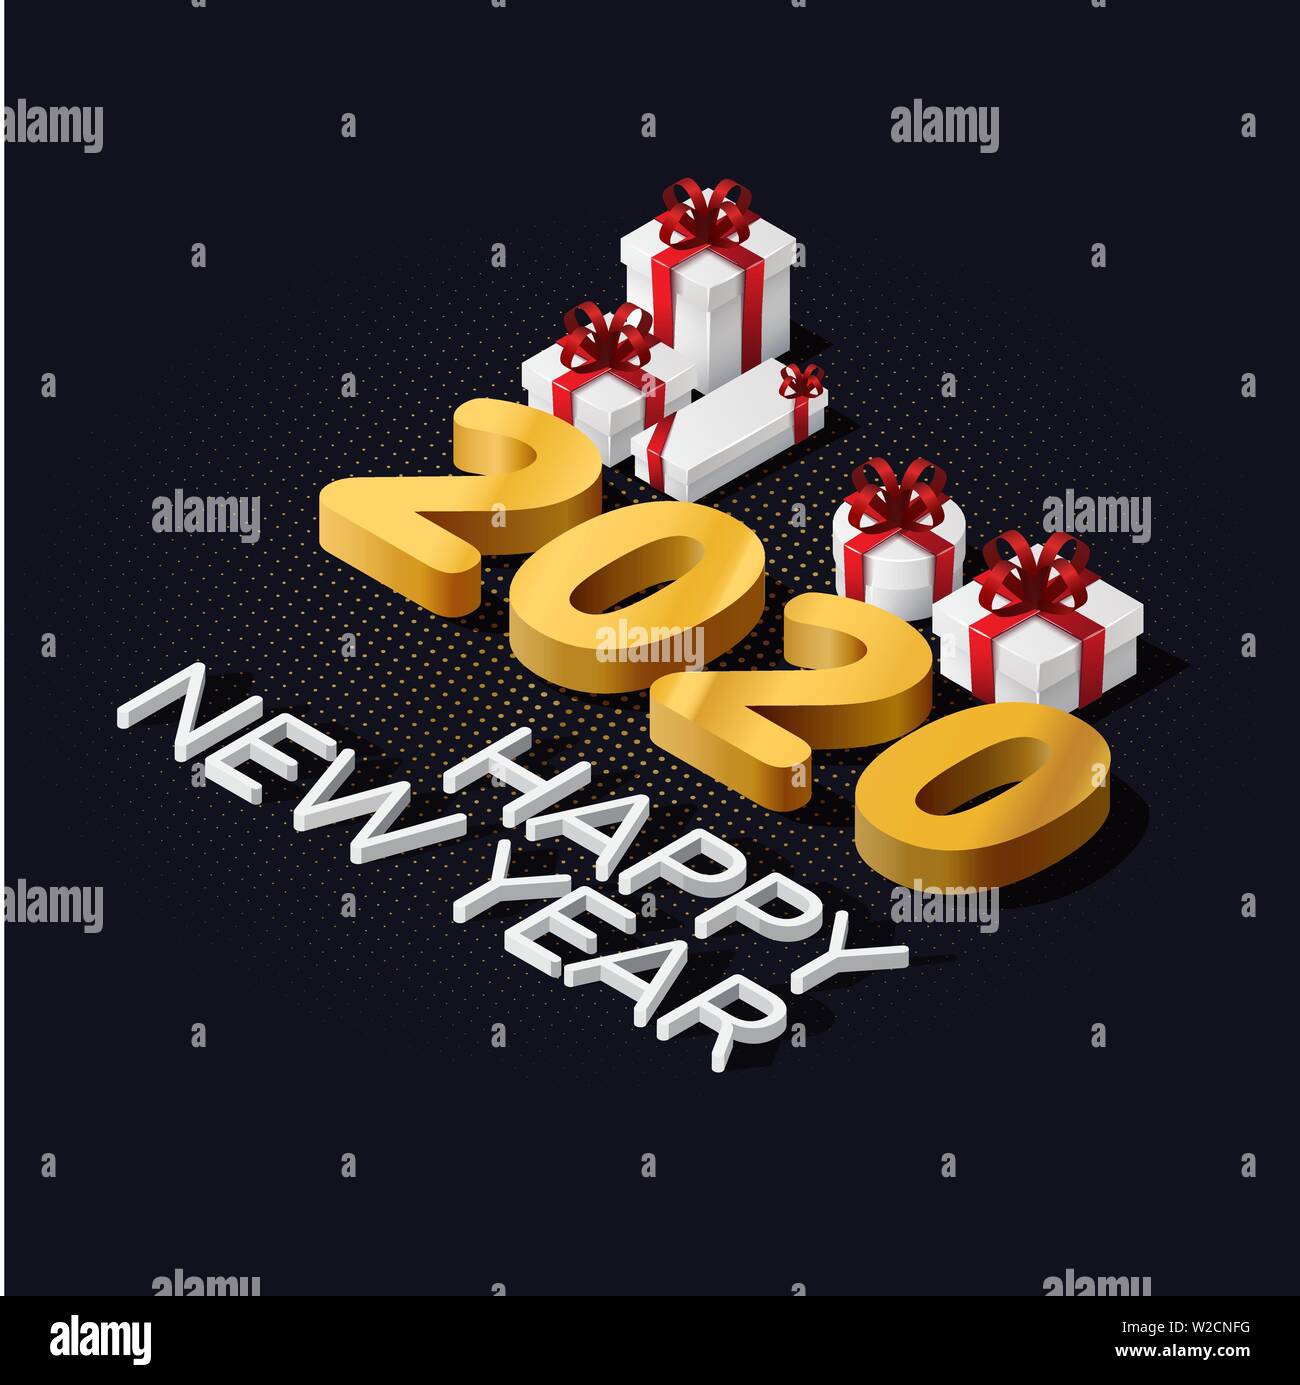 2020 Isometric Happy New Year And Gift Box Greeting Card